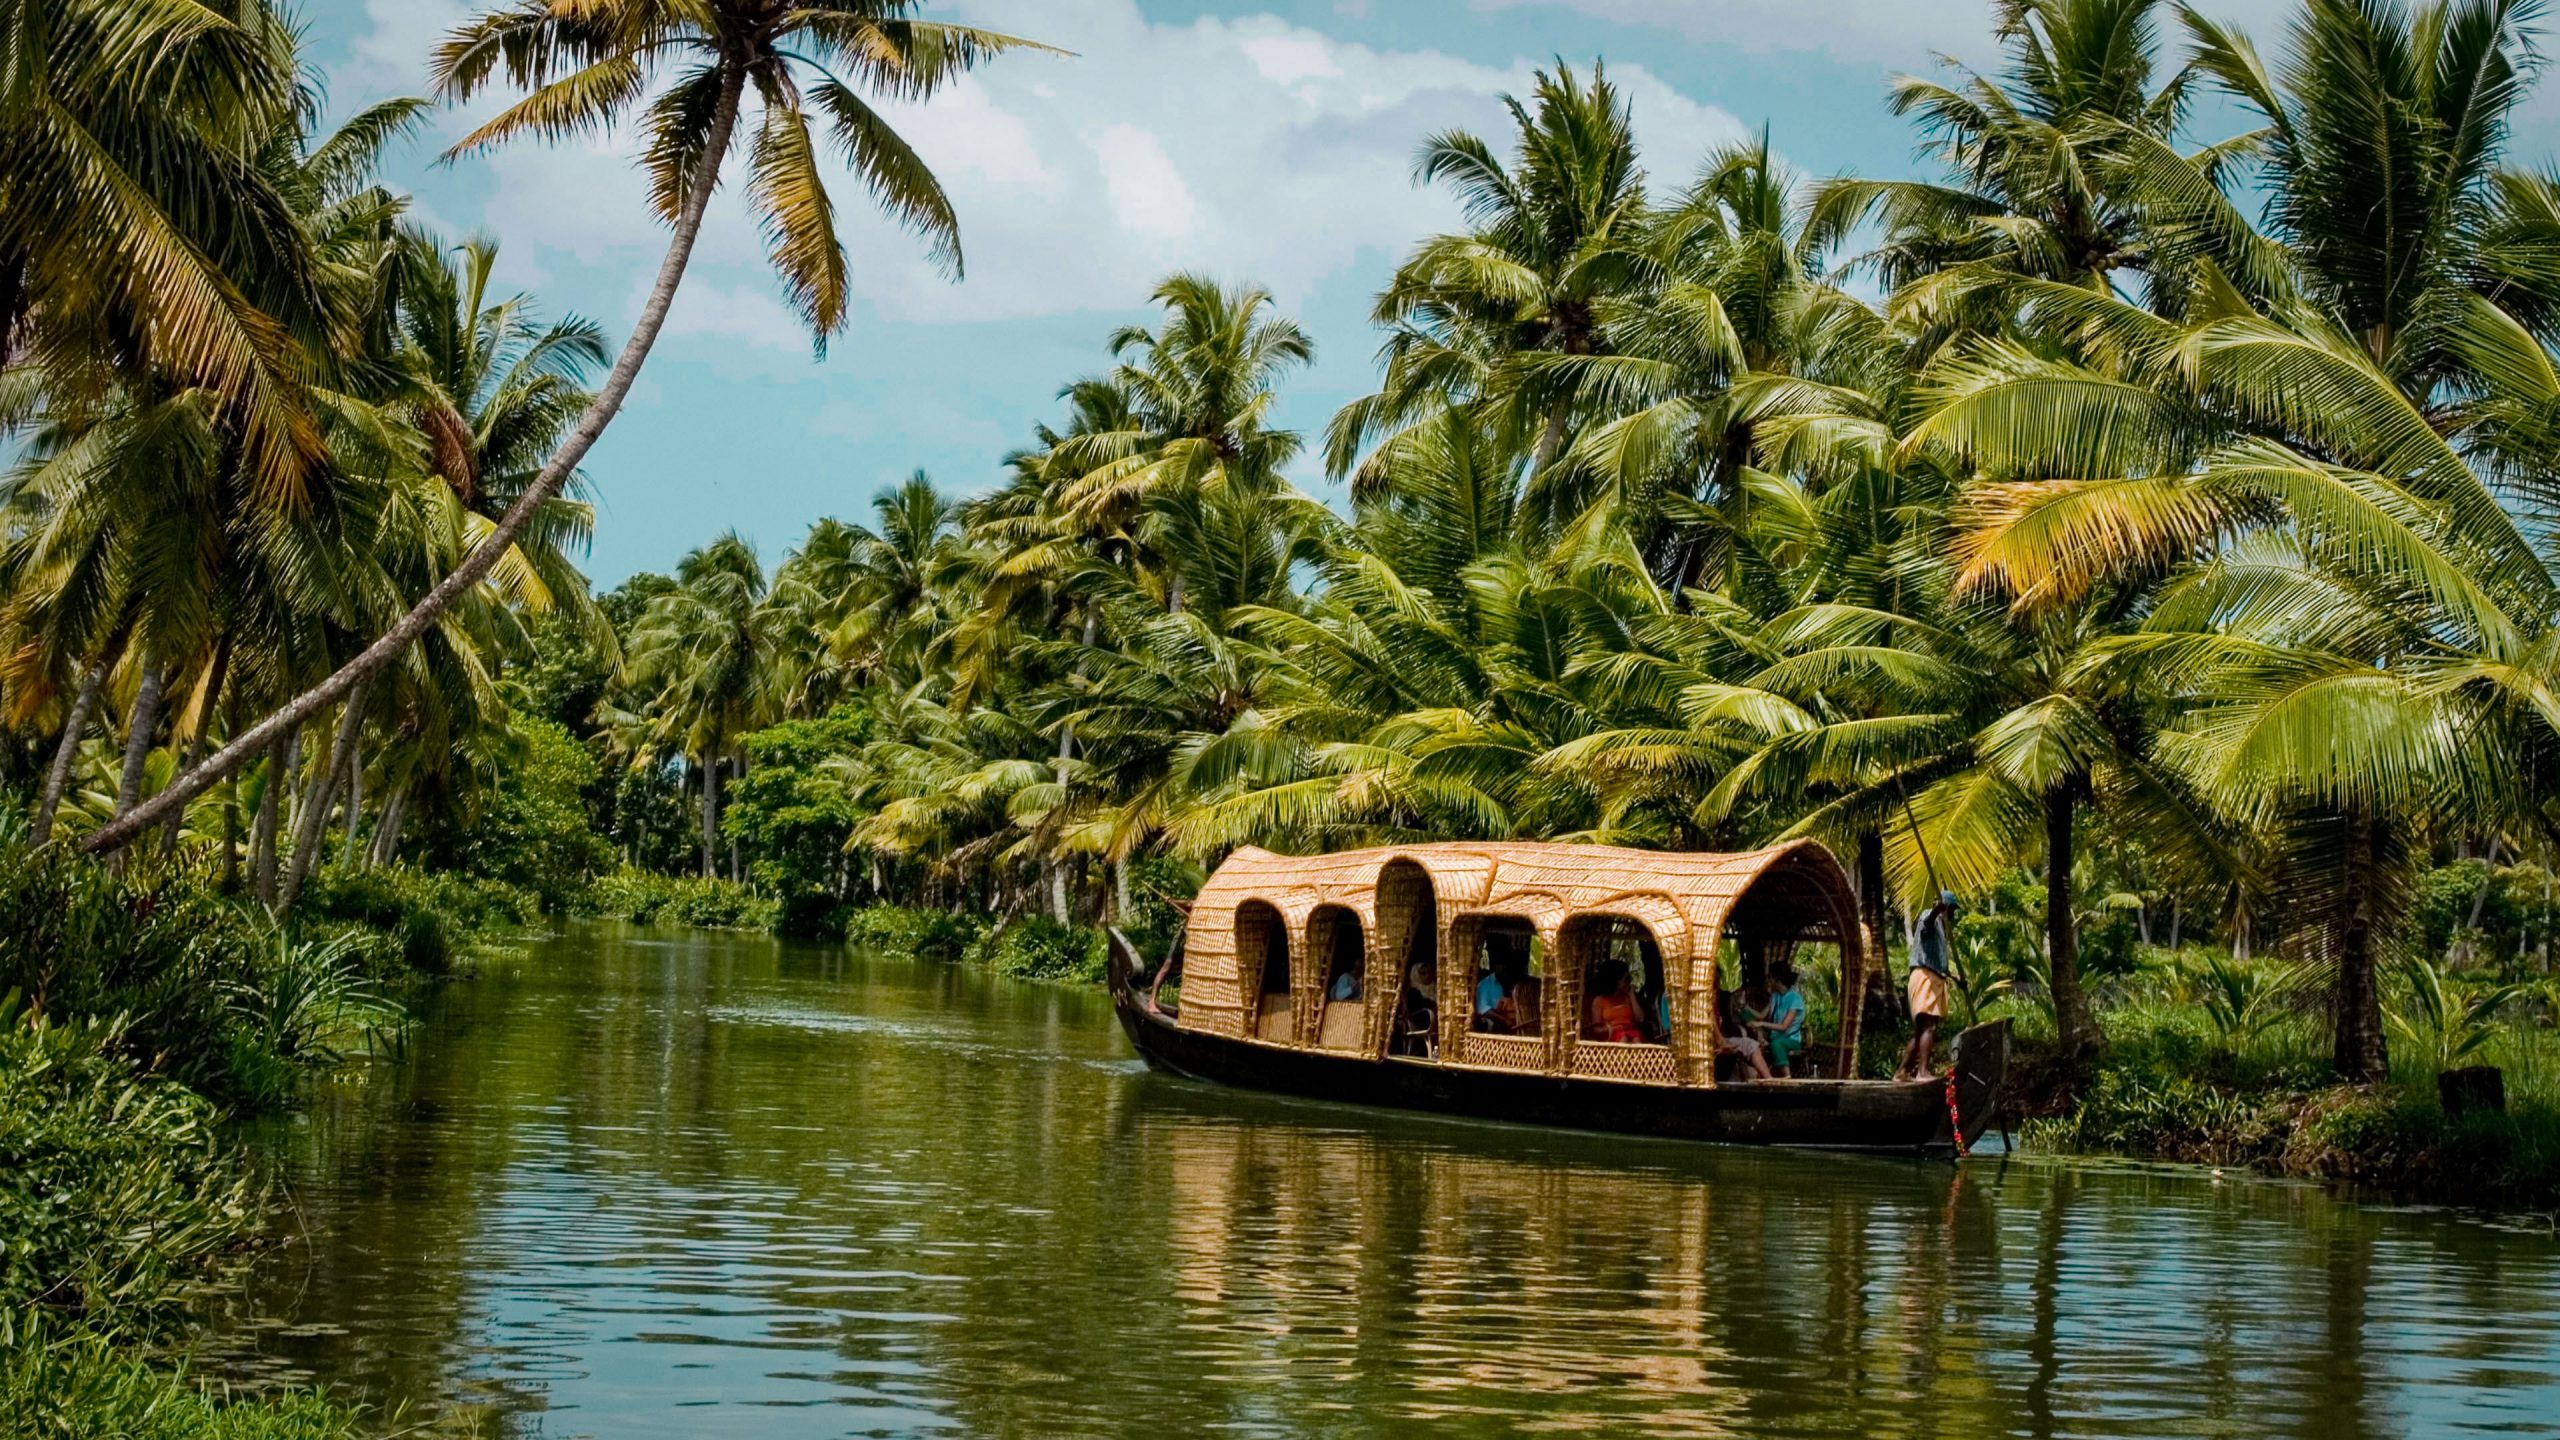 Kerala, India: "Look deep into nature, and then you will understand everything better."